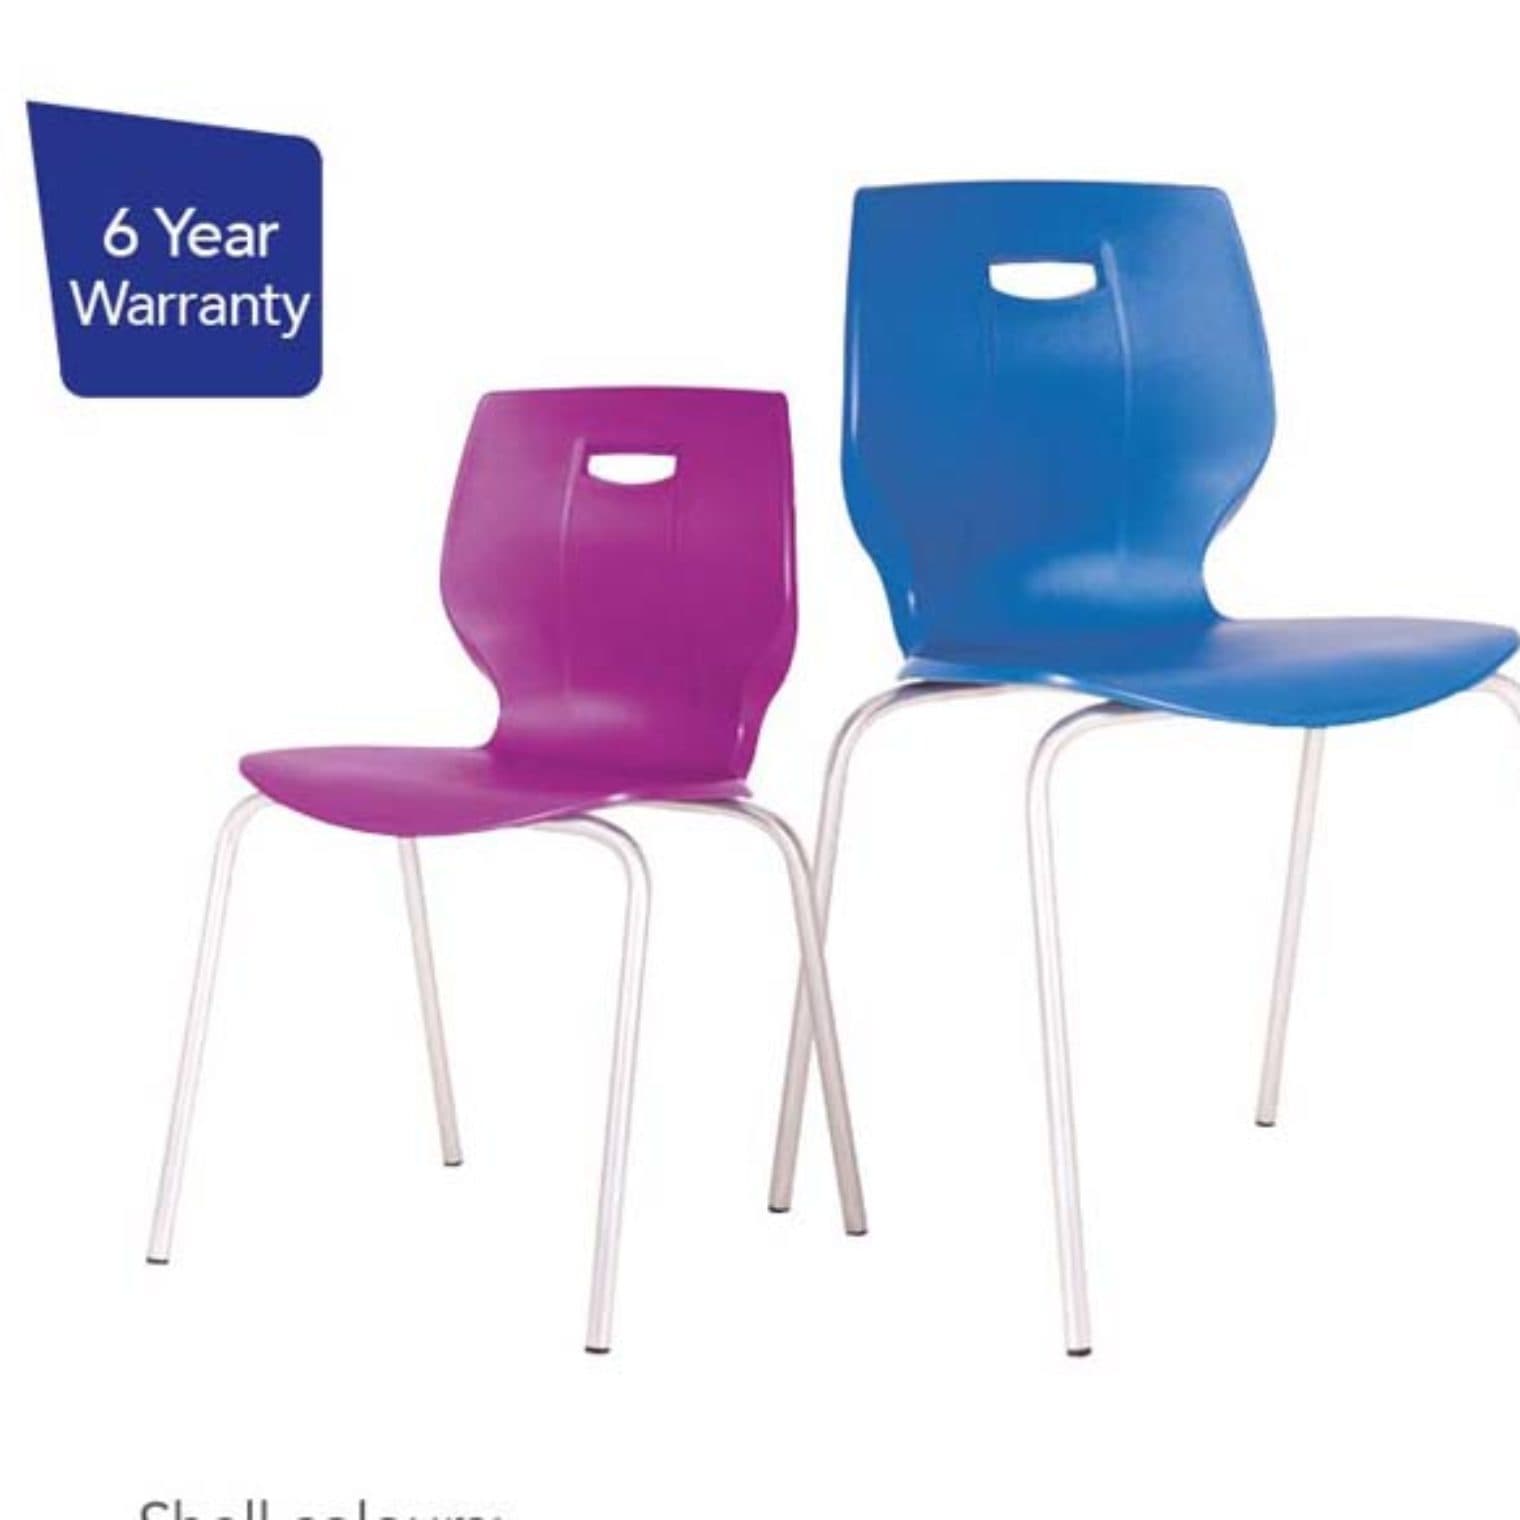 The Contour Poly chair